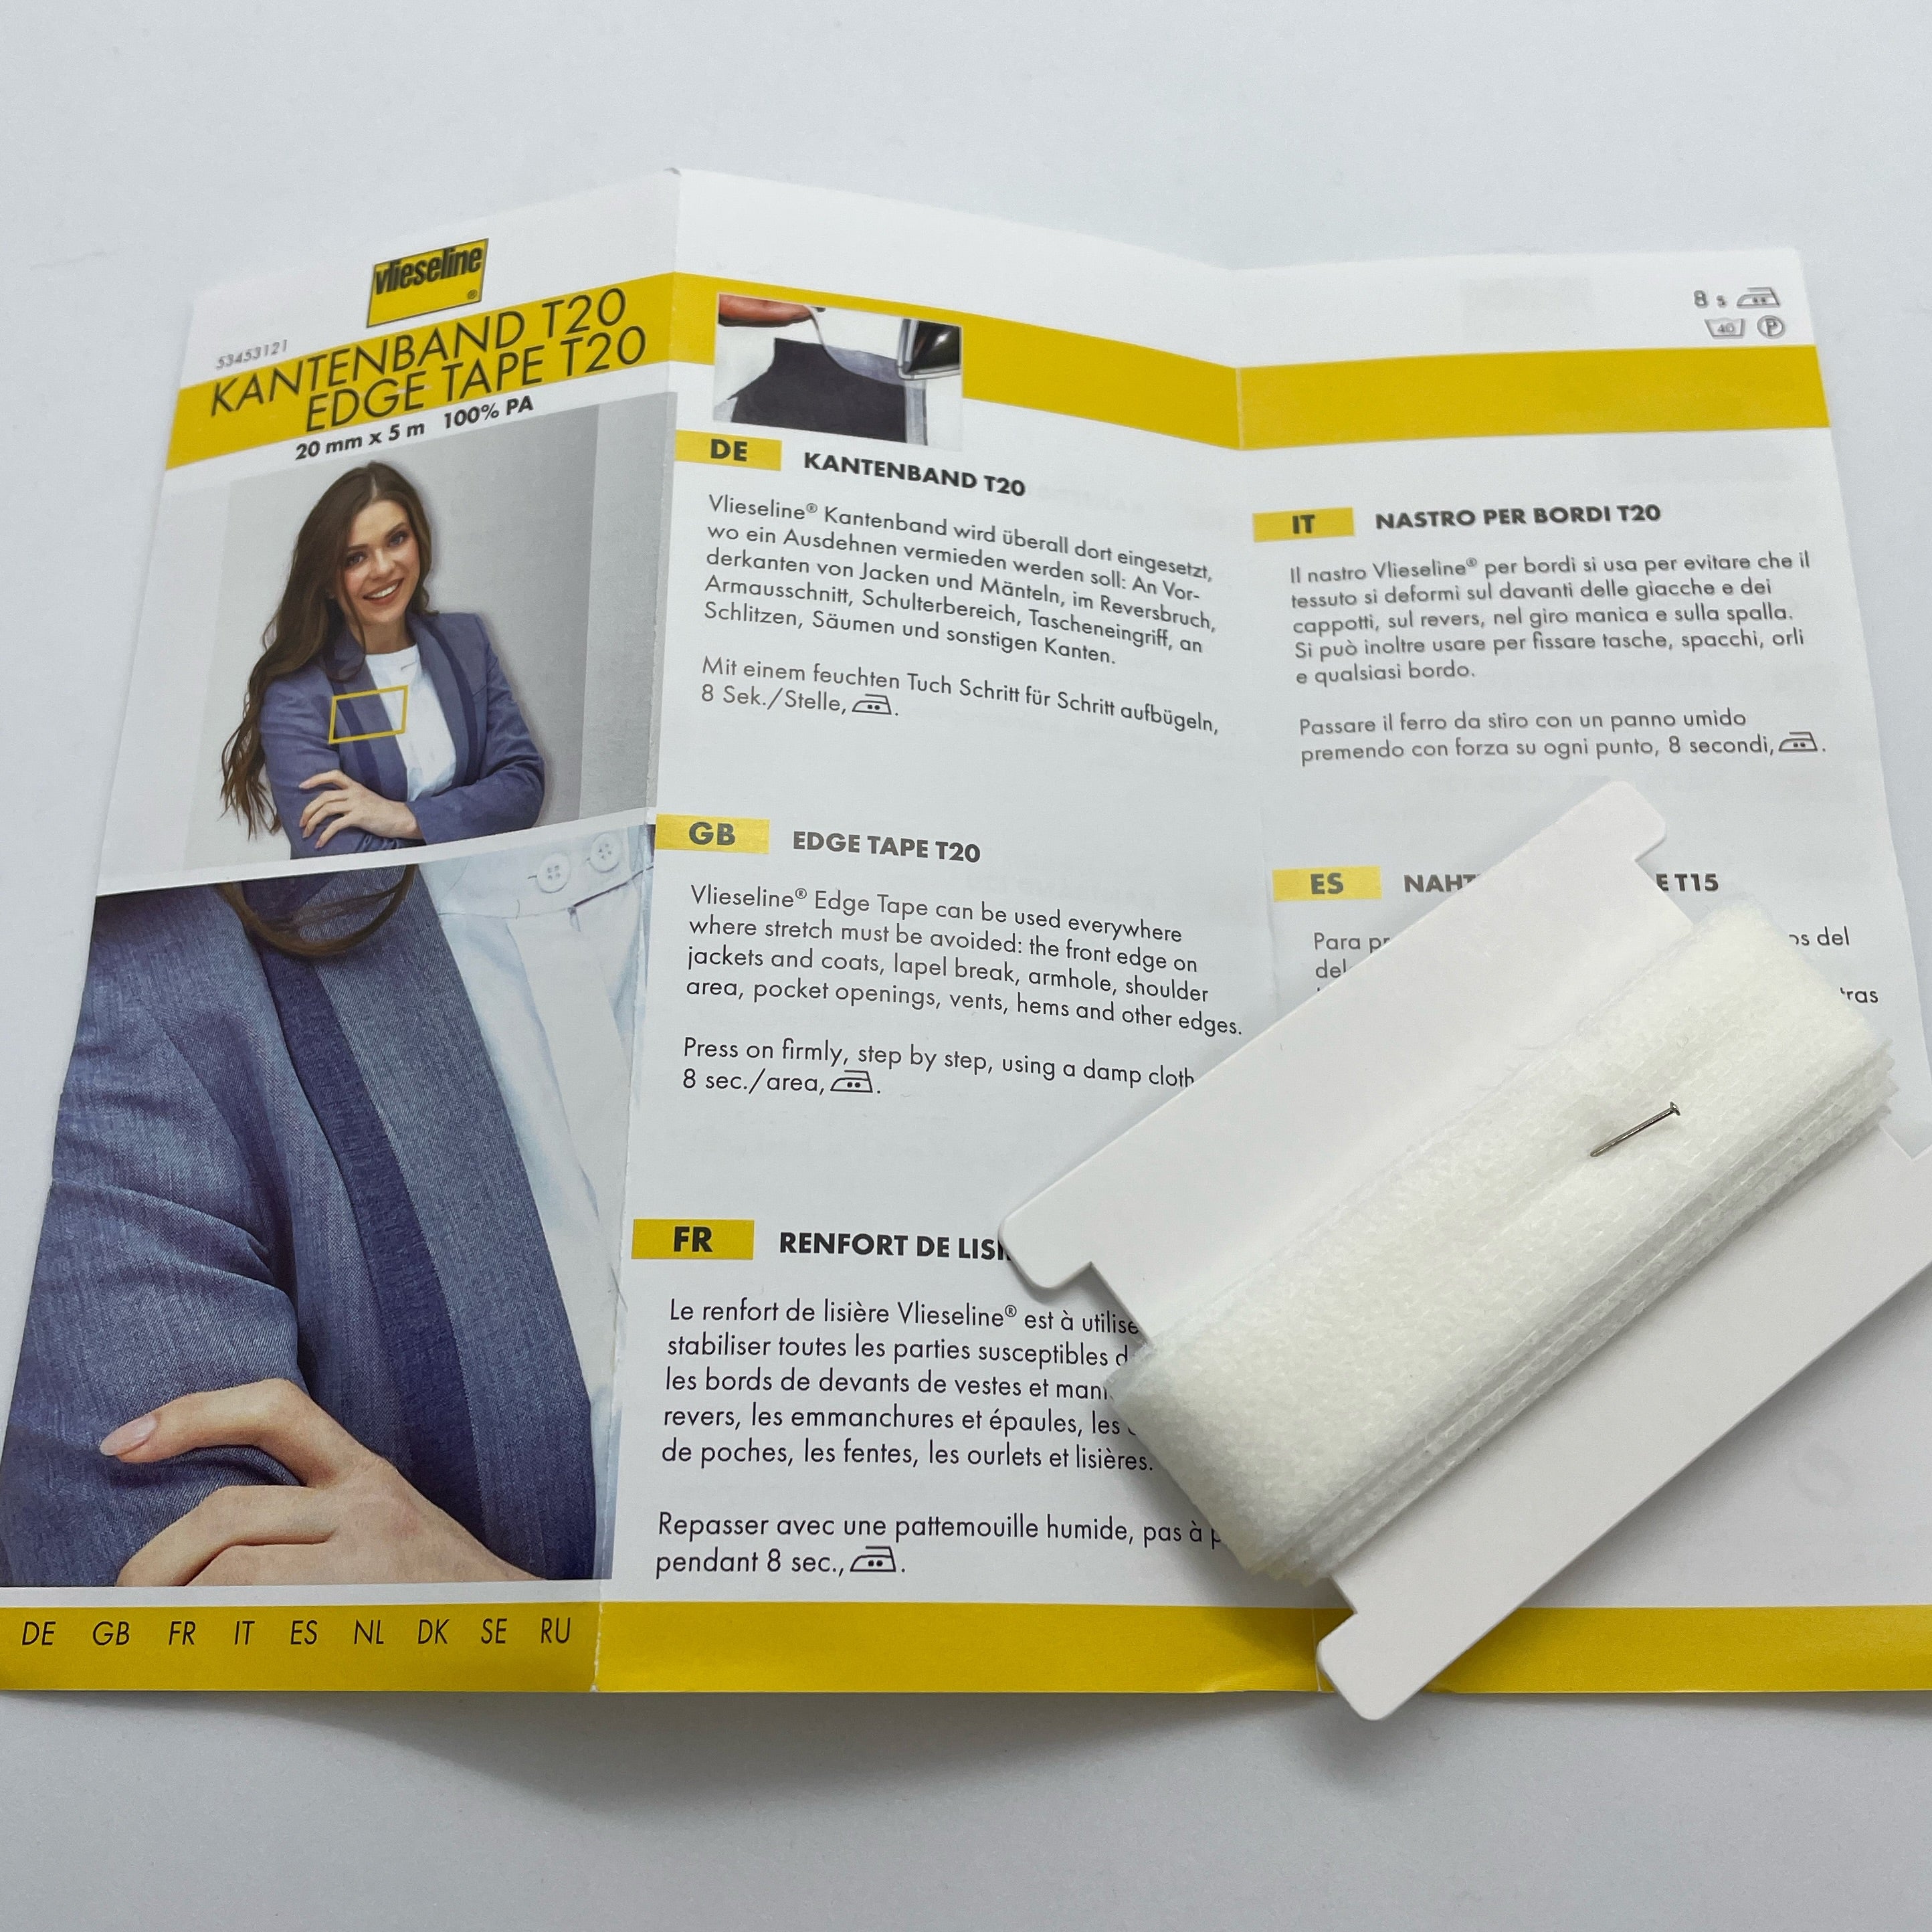 Vlieseline Edge Tape can be used wherewhere where stretch must be avoided:  the front edge on jackets and coats, lapel break, armhole, shoulder area, procket openings, vents, hems and other edges.     Press on firmly, step by step, using a damp cloth 10 seconds/area.     20mm wide by 5 m 